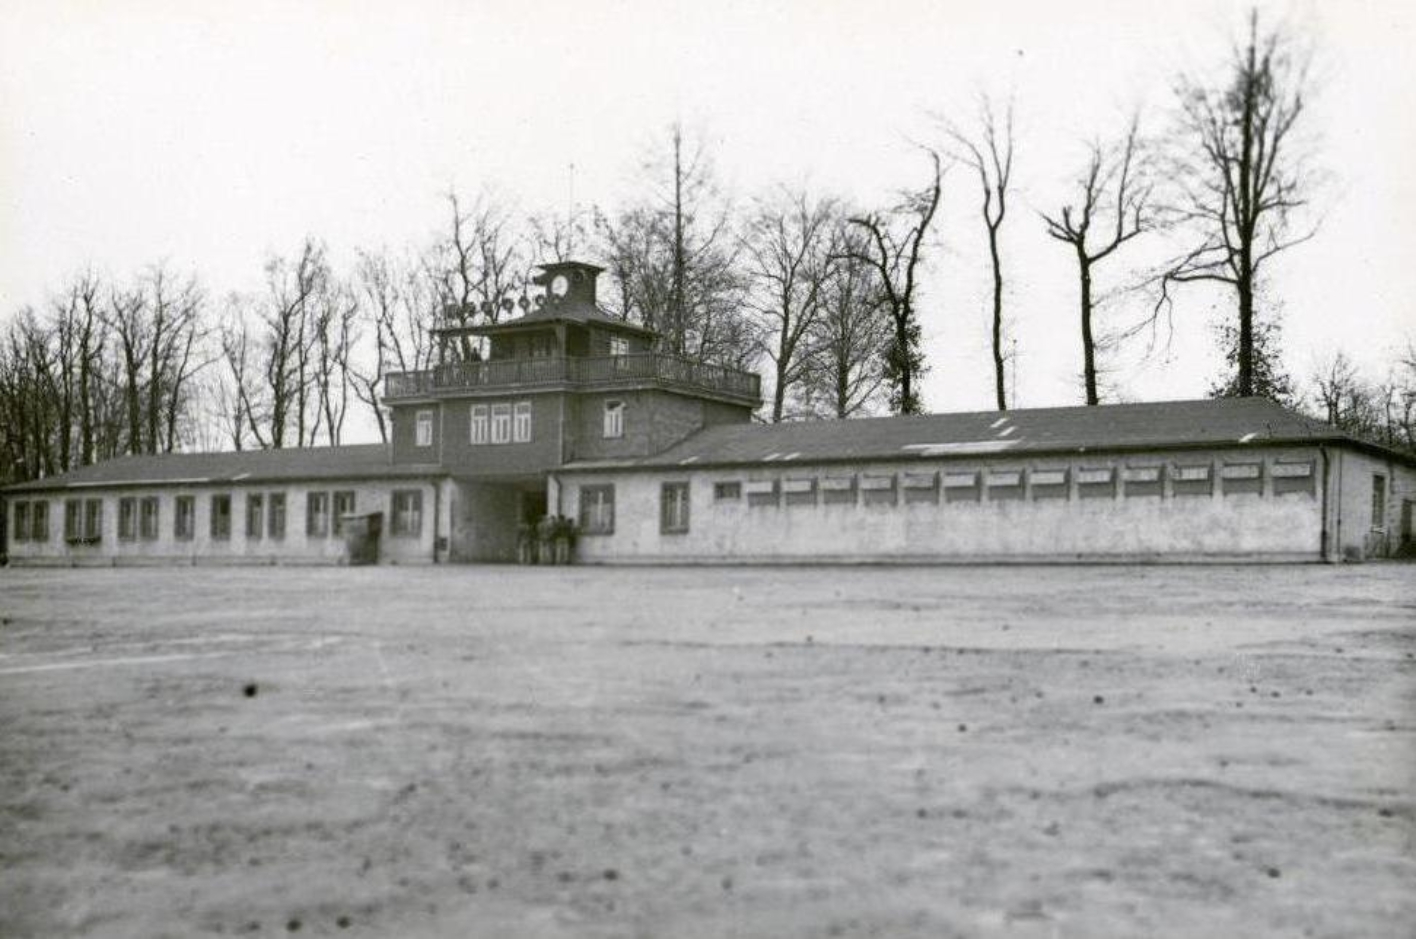 View across the empty roll call square to the gate building. The window panes of the detention cell building can be seen on the right annex.